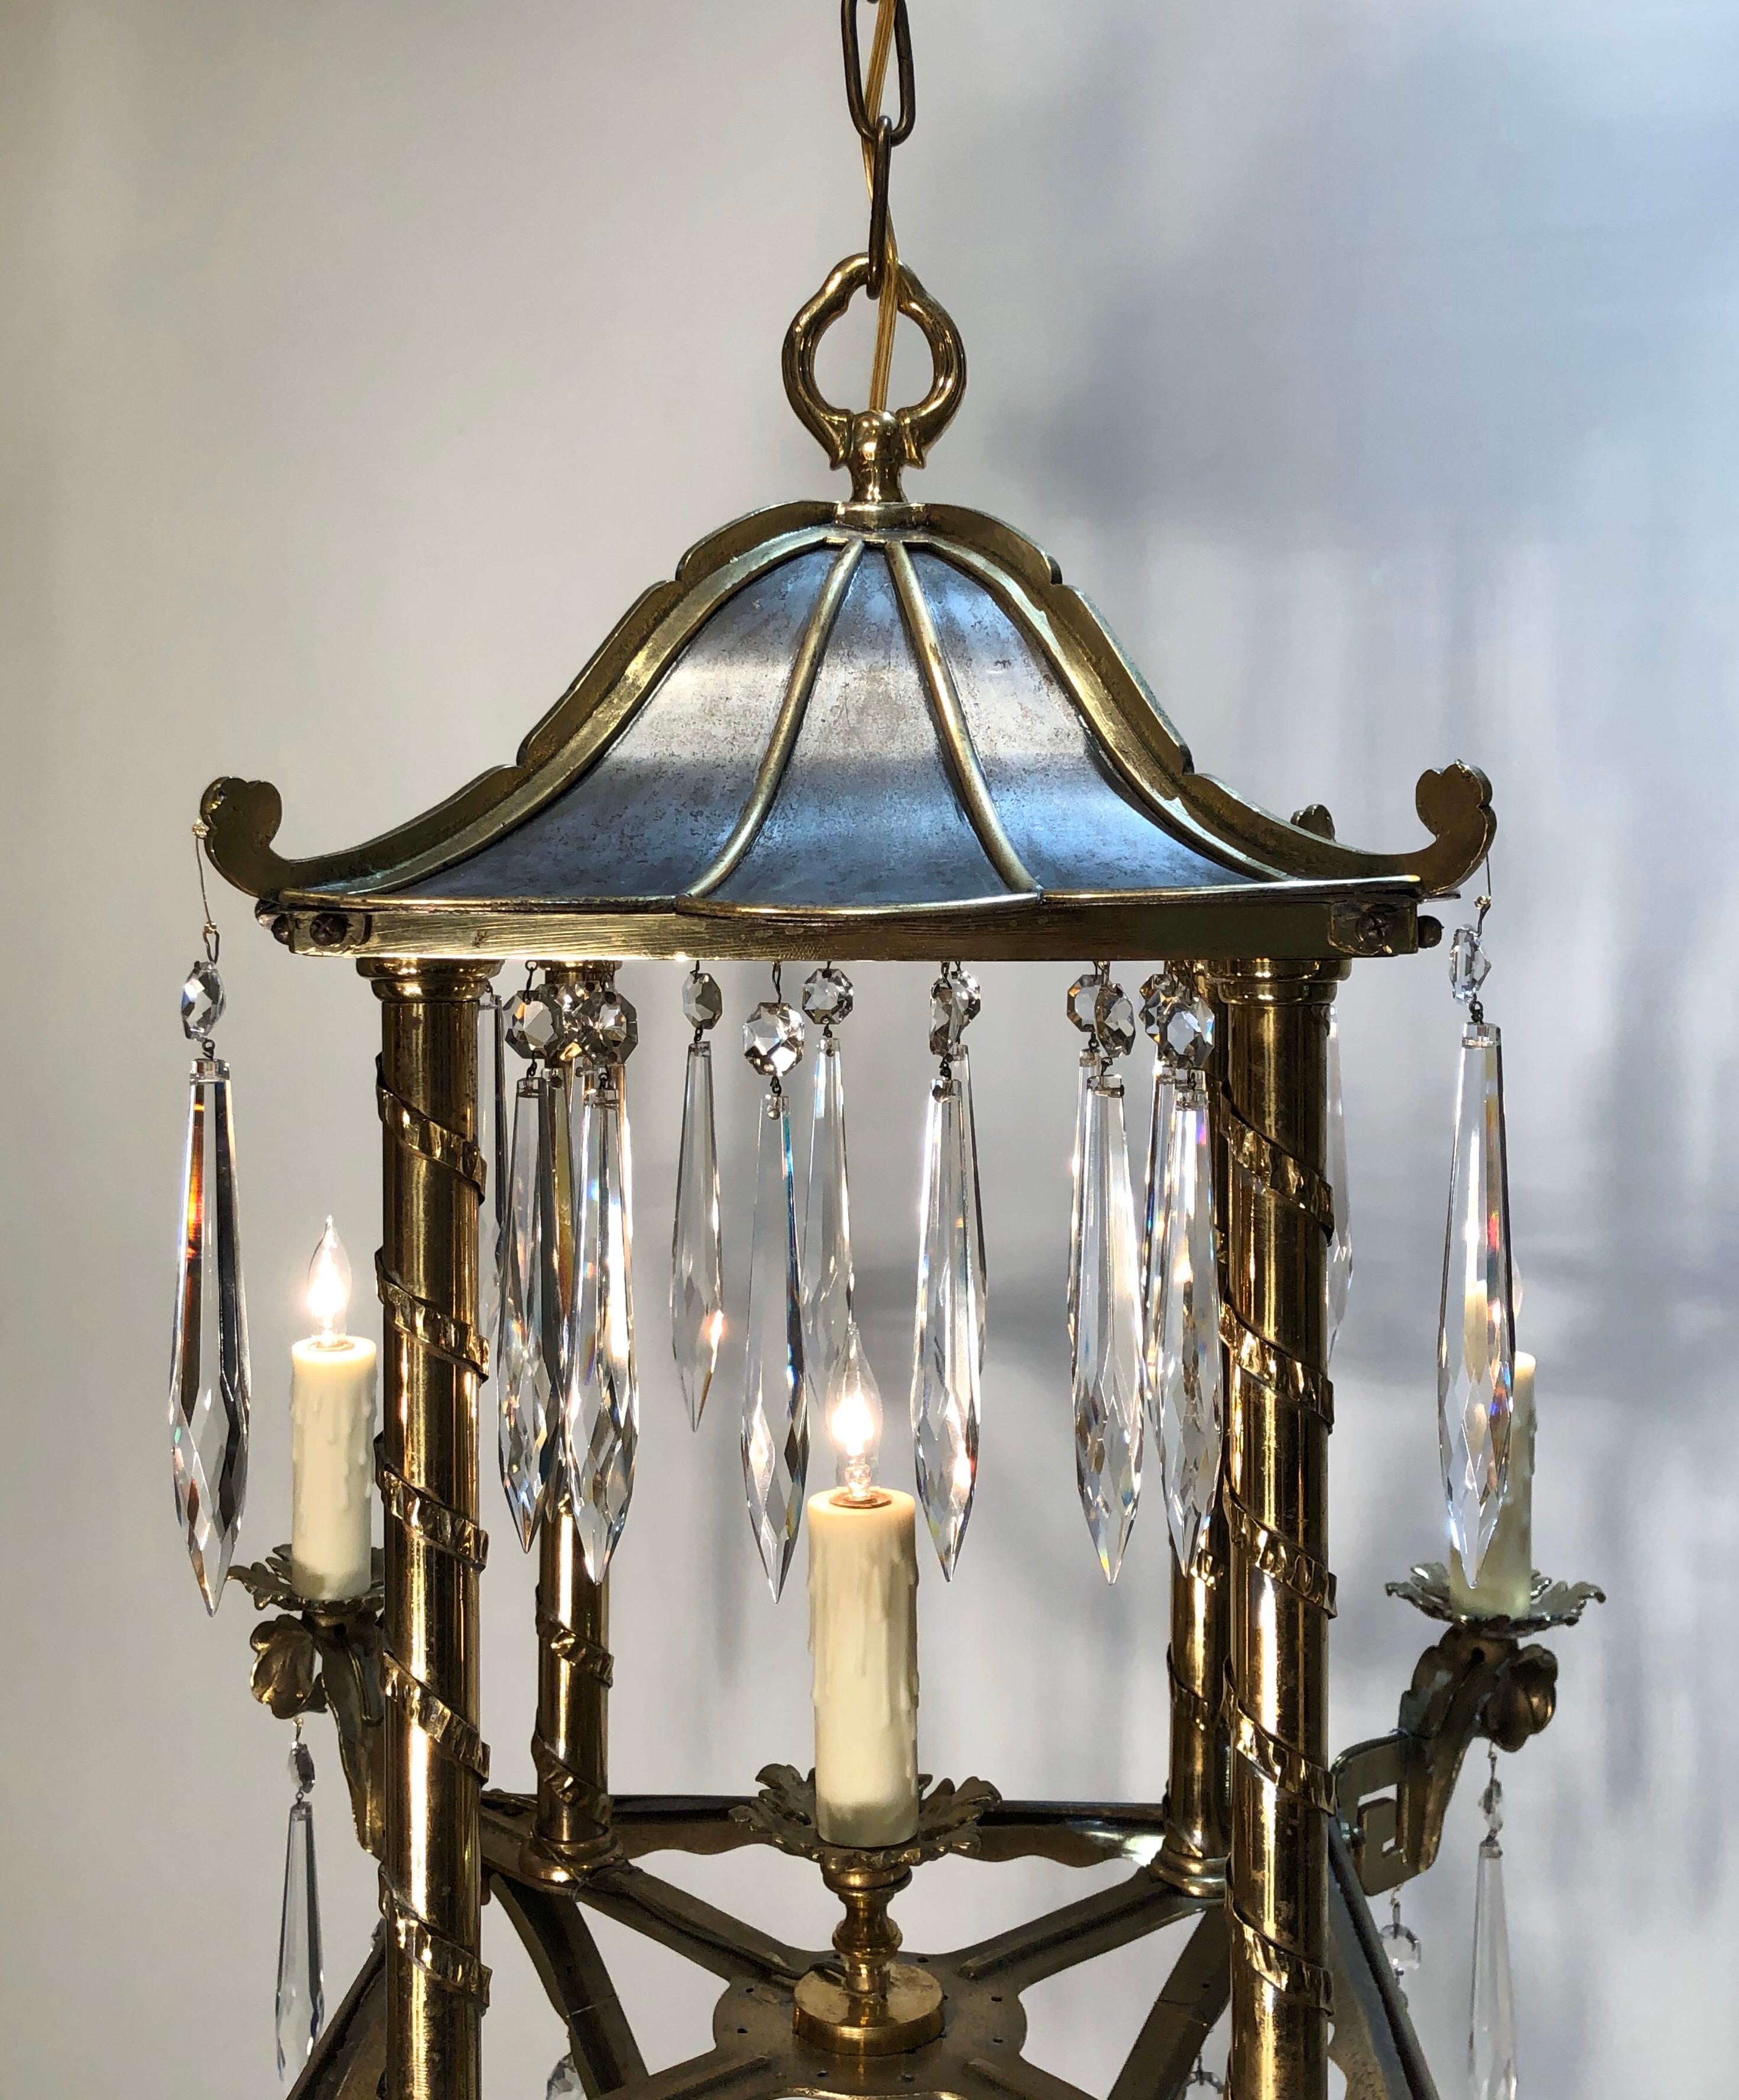 This elegant Jansen style lantern has a two-tone silver and brass finish. The Lantern has a detailed pagoda top with crystal prisms. The top is held up by four columns wrapped in vines sitting on a brass framed console with candle lights on the